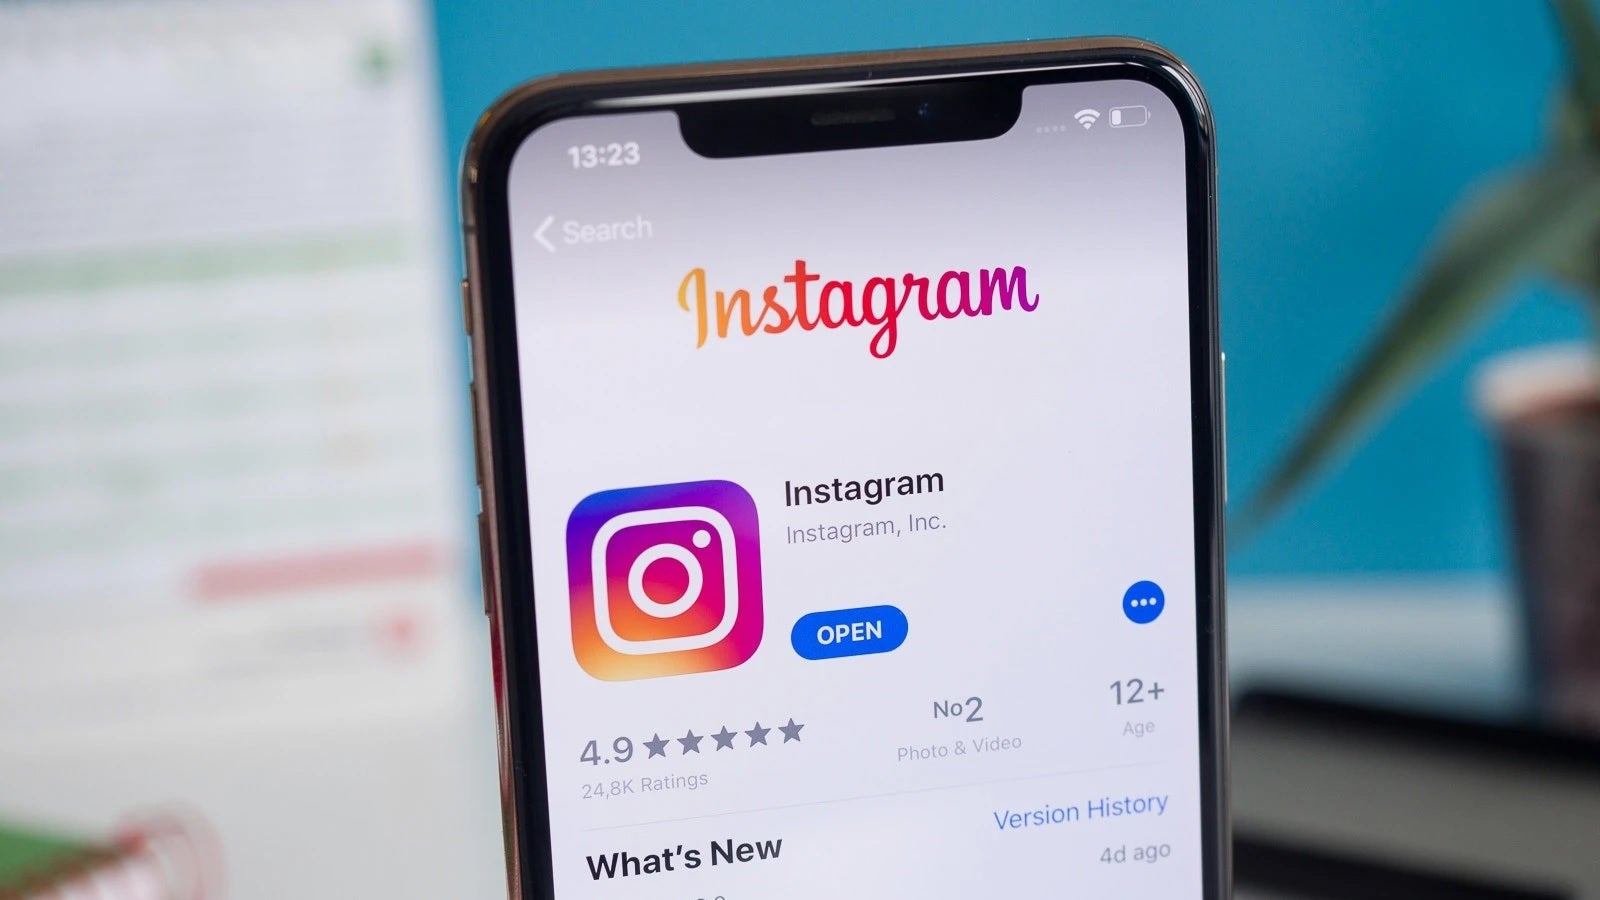 Facebook reportedly focused its Instagram ad spending on teens - Internal memo reveals Instagram's concern about losing its teenage users